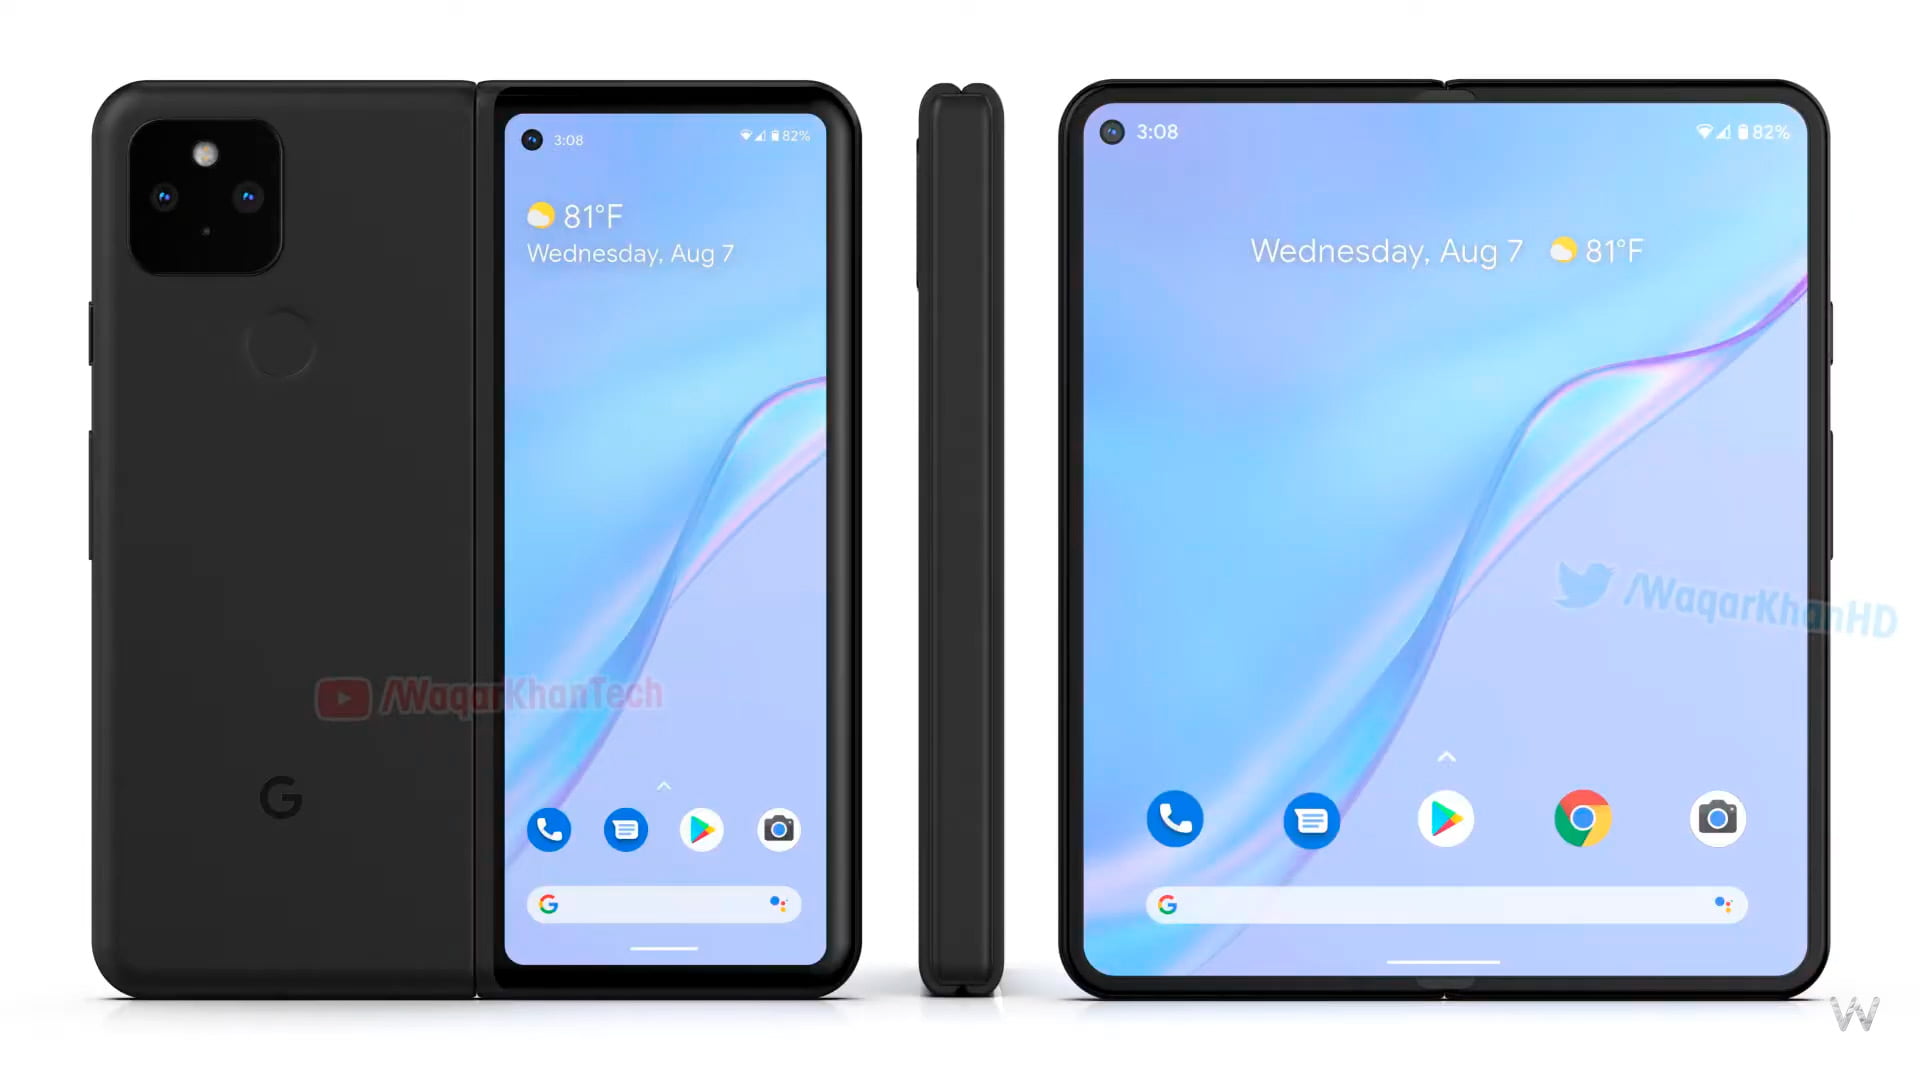 This video shows what a Google Pixel foldable could look like